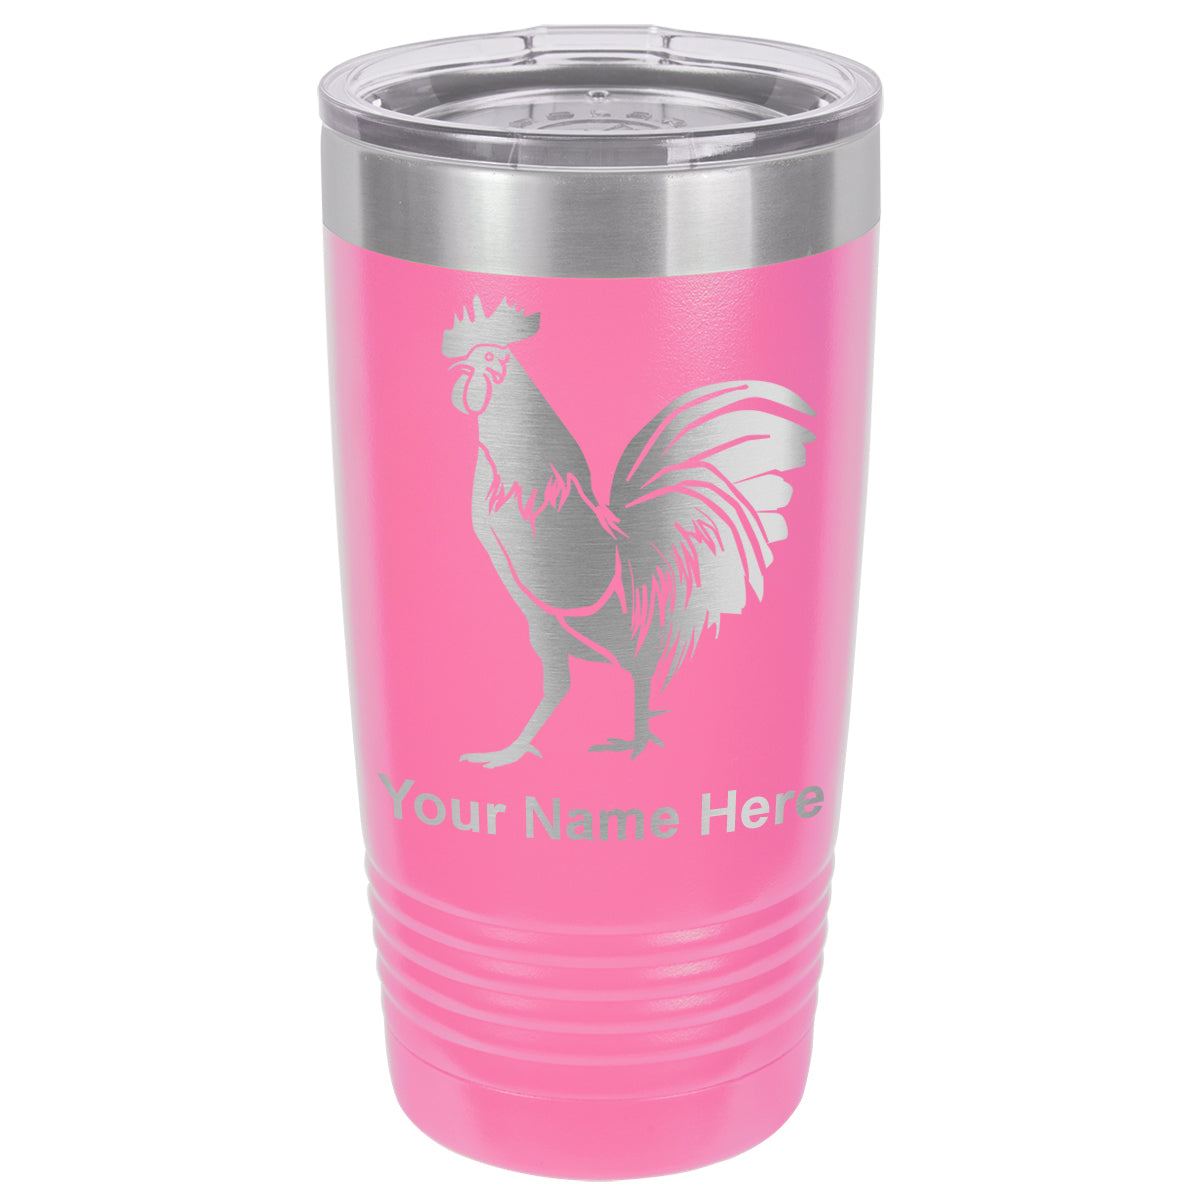 20oz Vacuum Insulated Tumbler Mug, Rooster, Personalized Engraving Included